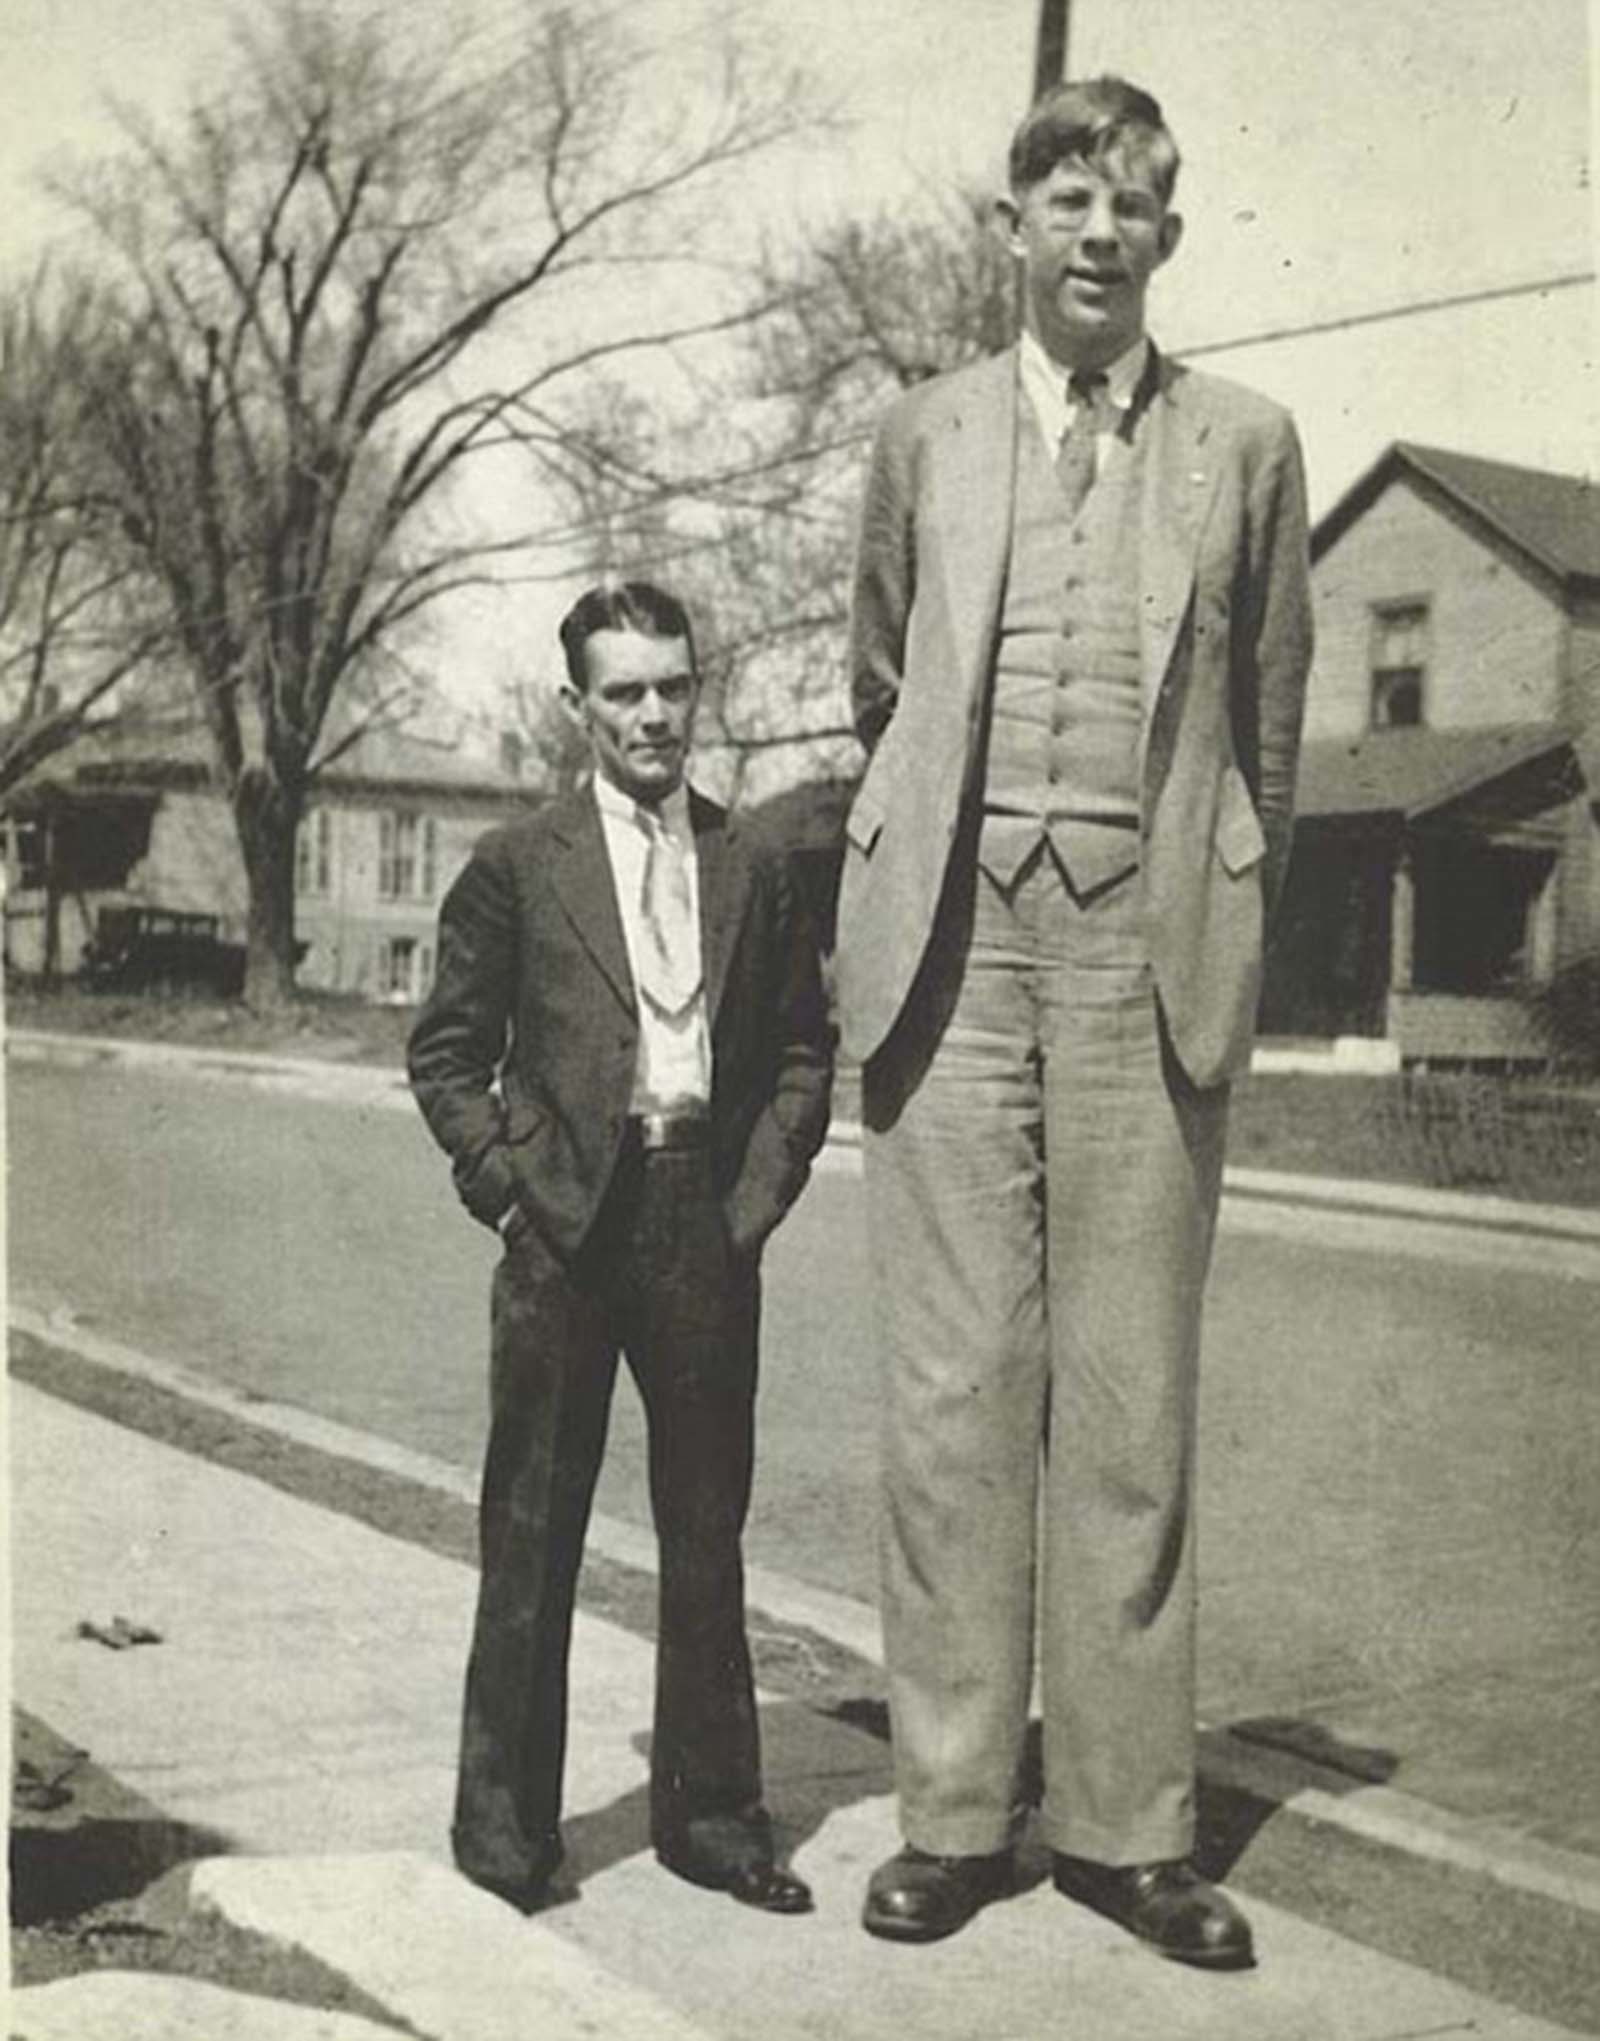 Robert Wadlow: Life Story and Photos of World's Tallest Man in History